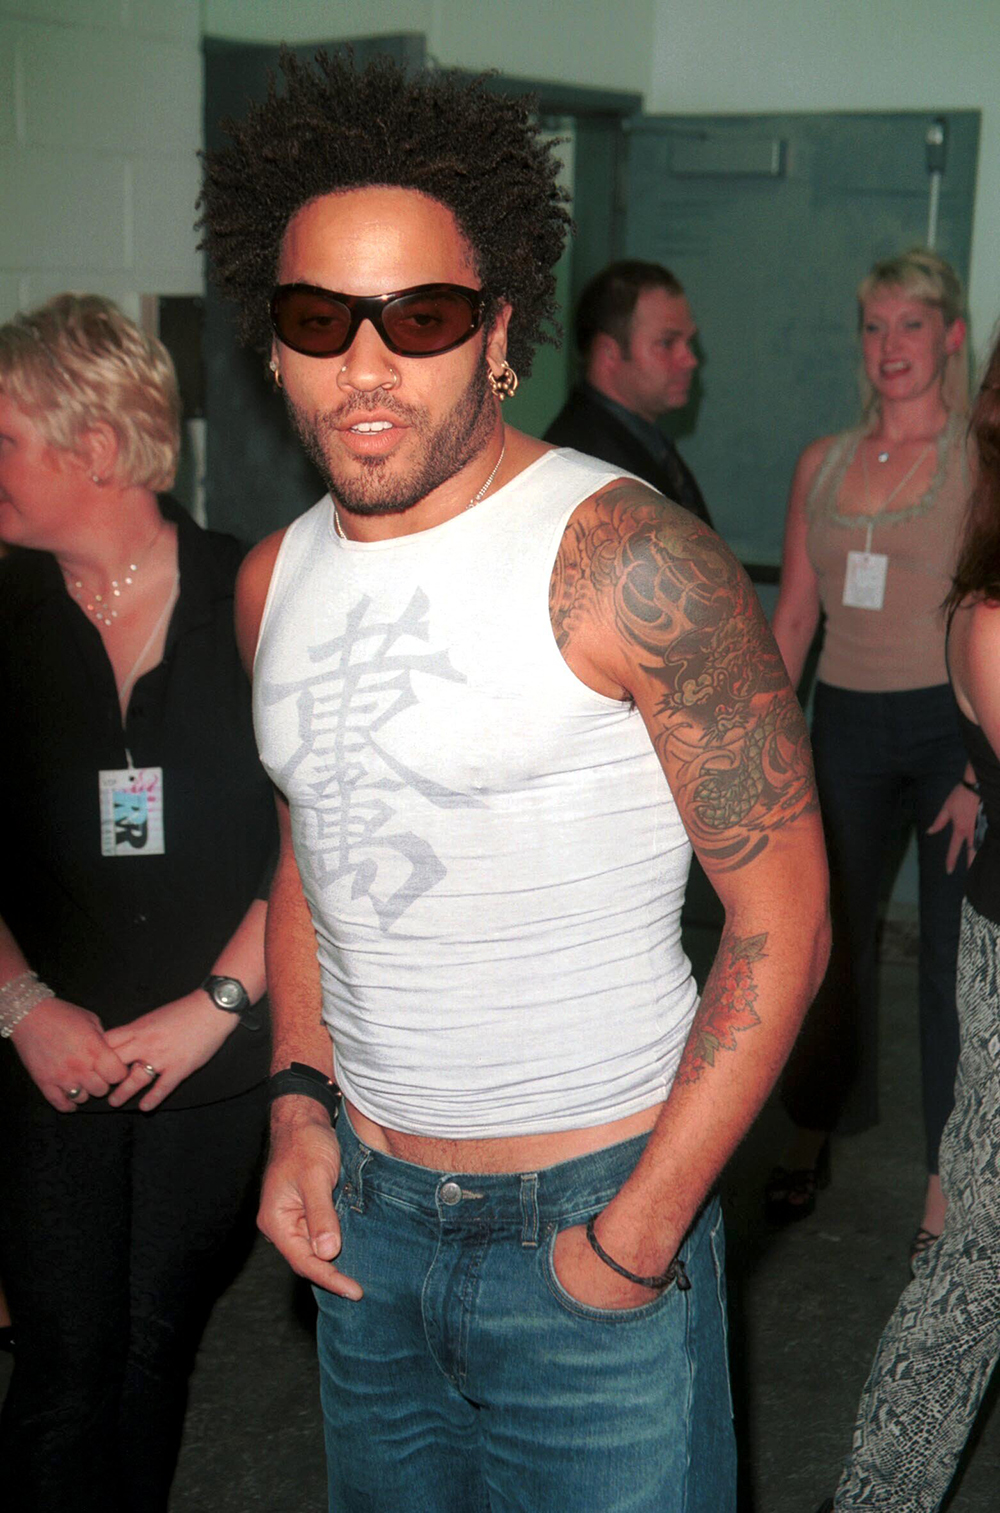 <p>Lenny Kravitz at The Rock ‘n Roll Rally in New York on August 3, 2000. He wore a tight tank top with a Chinese character on it.</p>